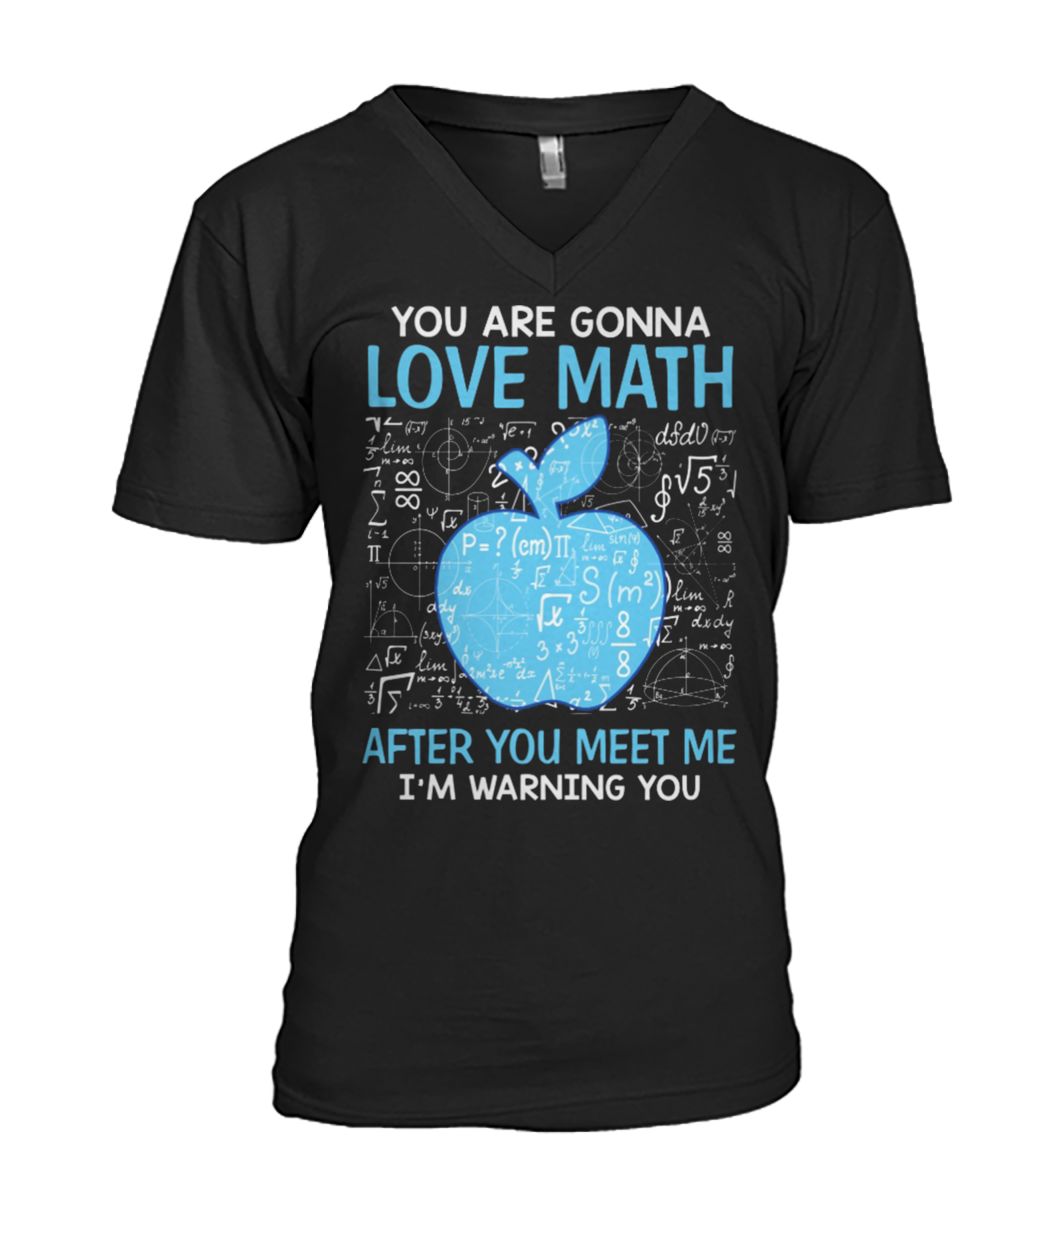 You are gonna love math after you meet me I'm warning you mens v-neck